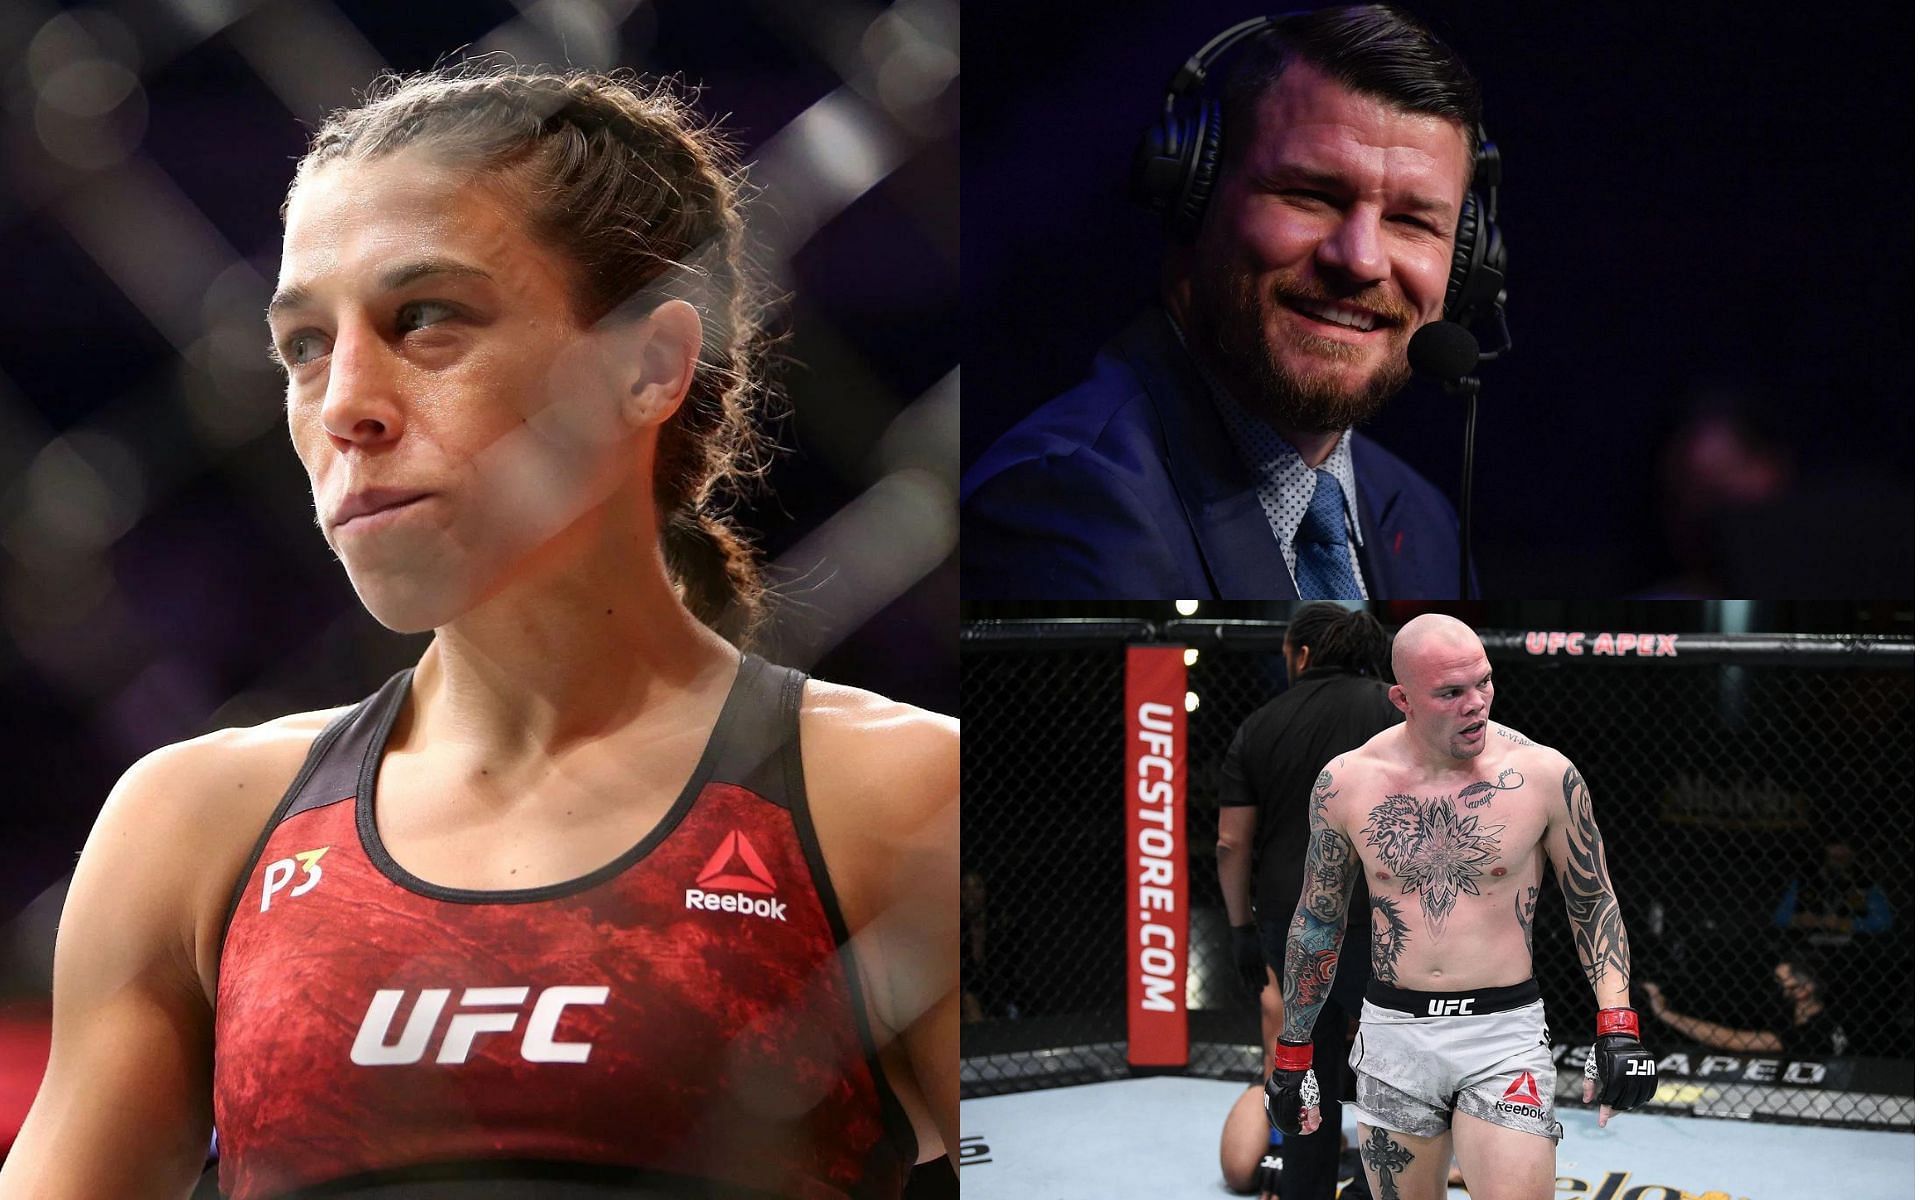 Joanna Jedrzejczyk (left), Michael Bisping (top right), Anthony Smith (bottom right) [Images courtesy of Getty]